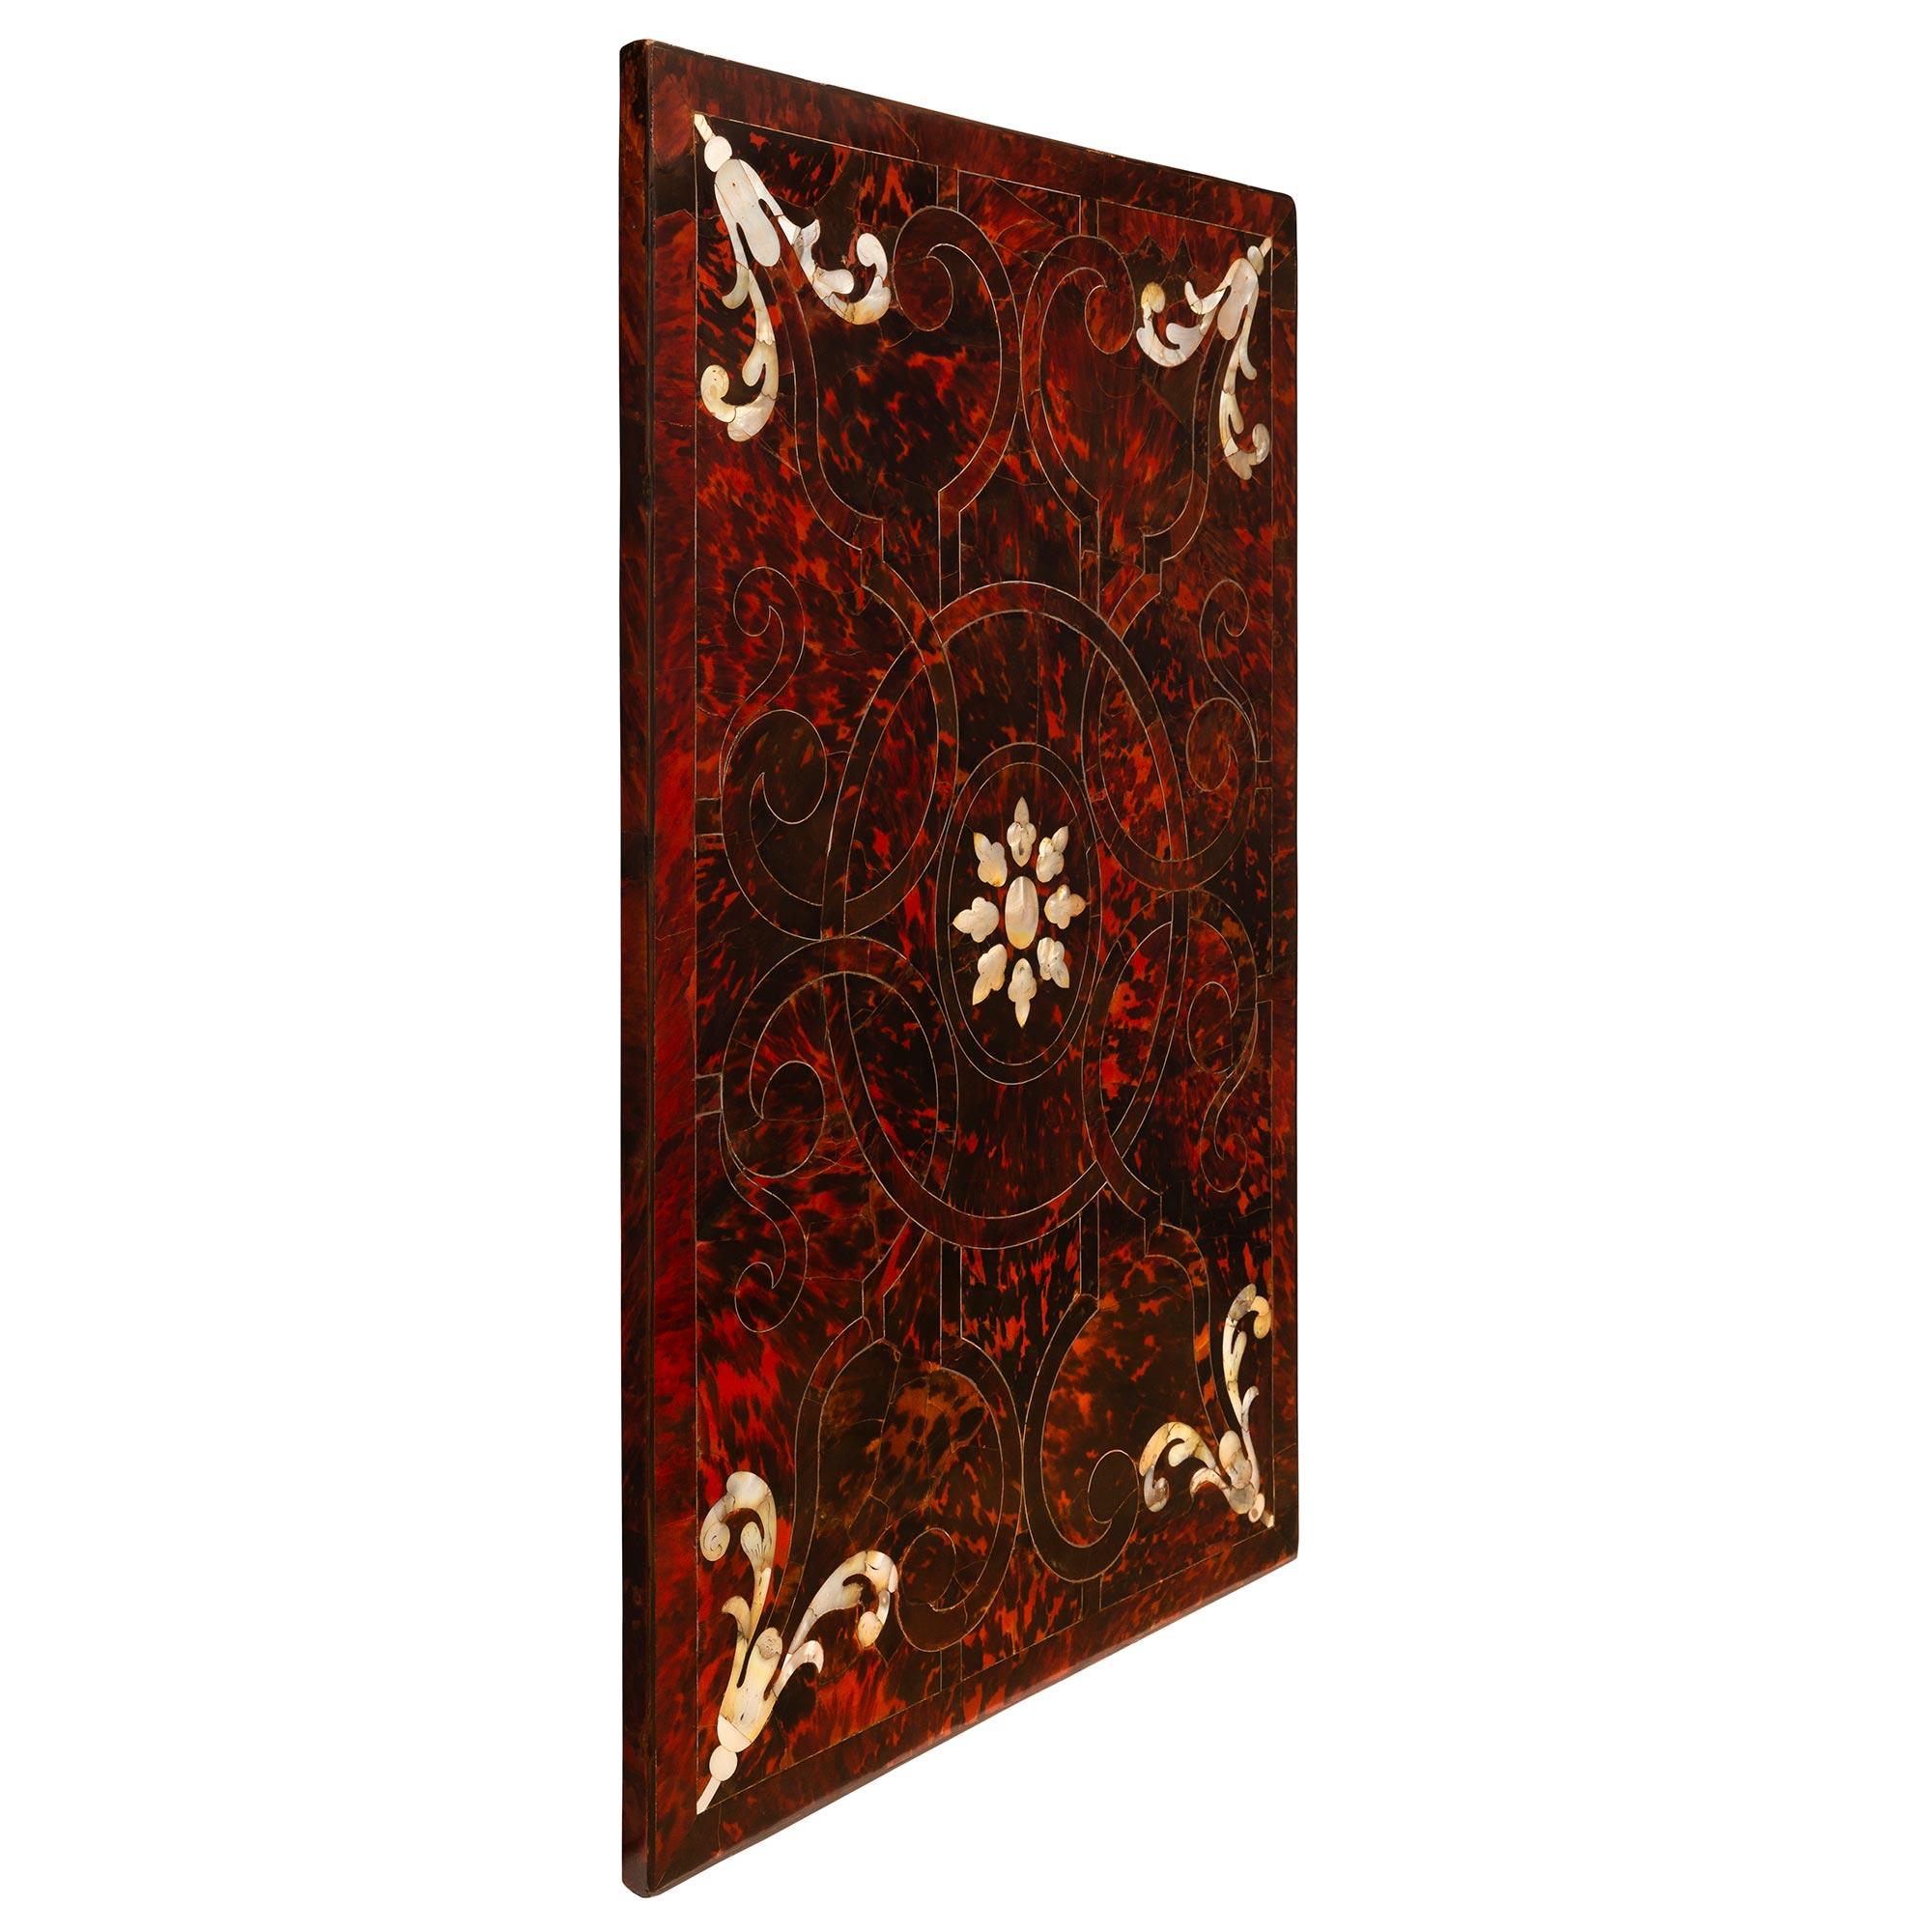 A stunning and very unique Italian 18th century Baroque st. Tortoiseshell and Mother of Pearl wall decor plaque. The extremely decorative rectangular plaque displays a stunning and most decorative red Tortoiseshell background with wonderfully